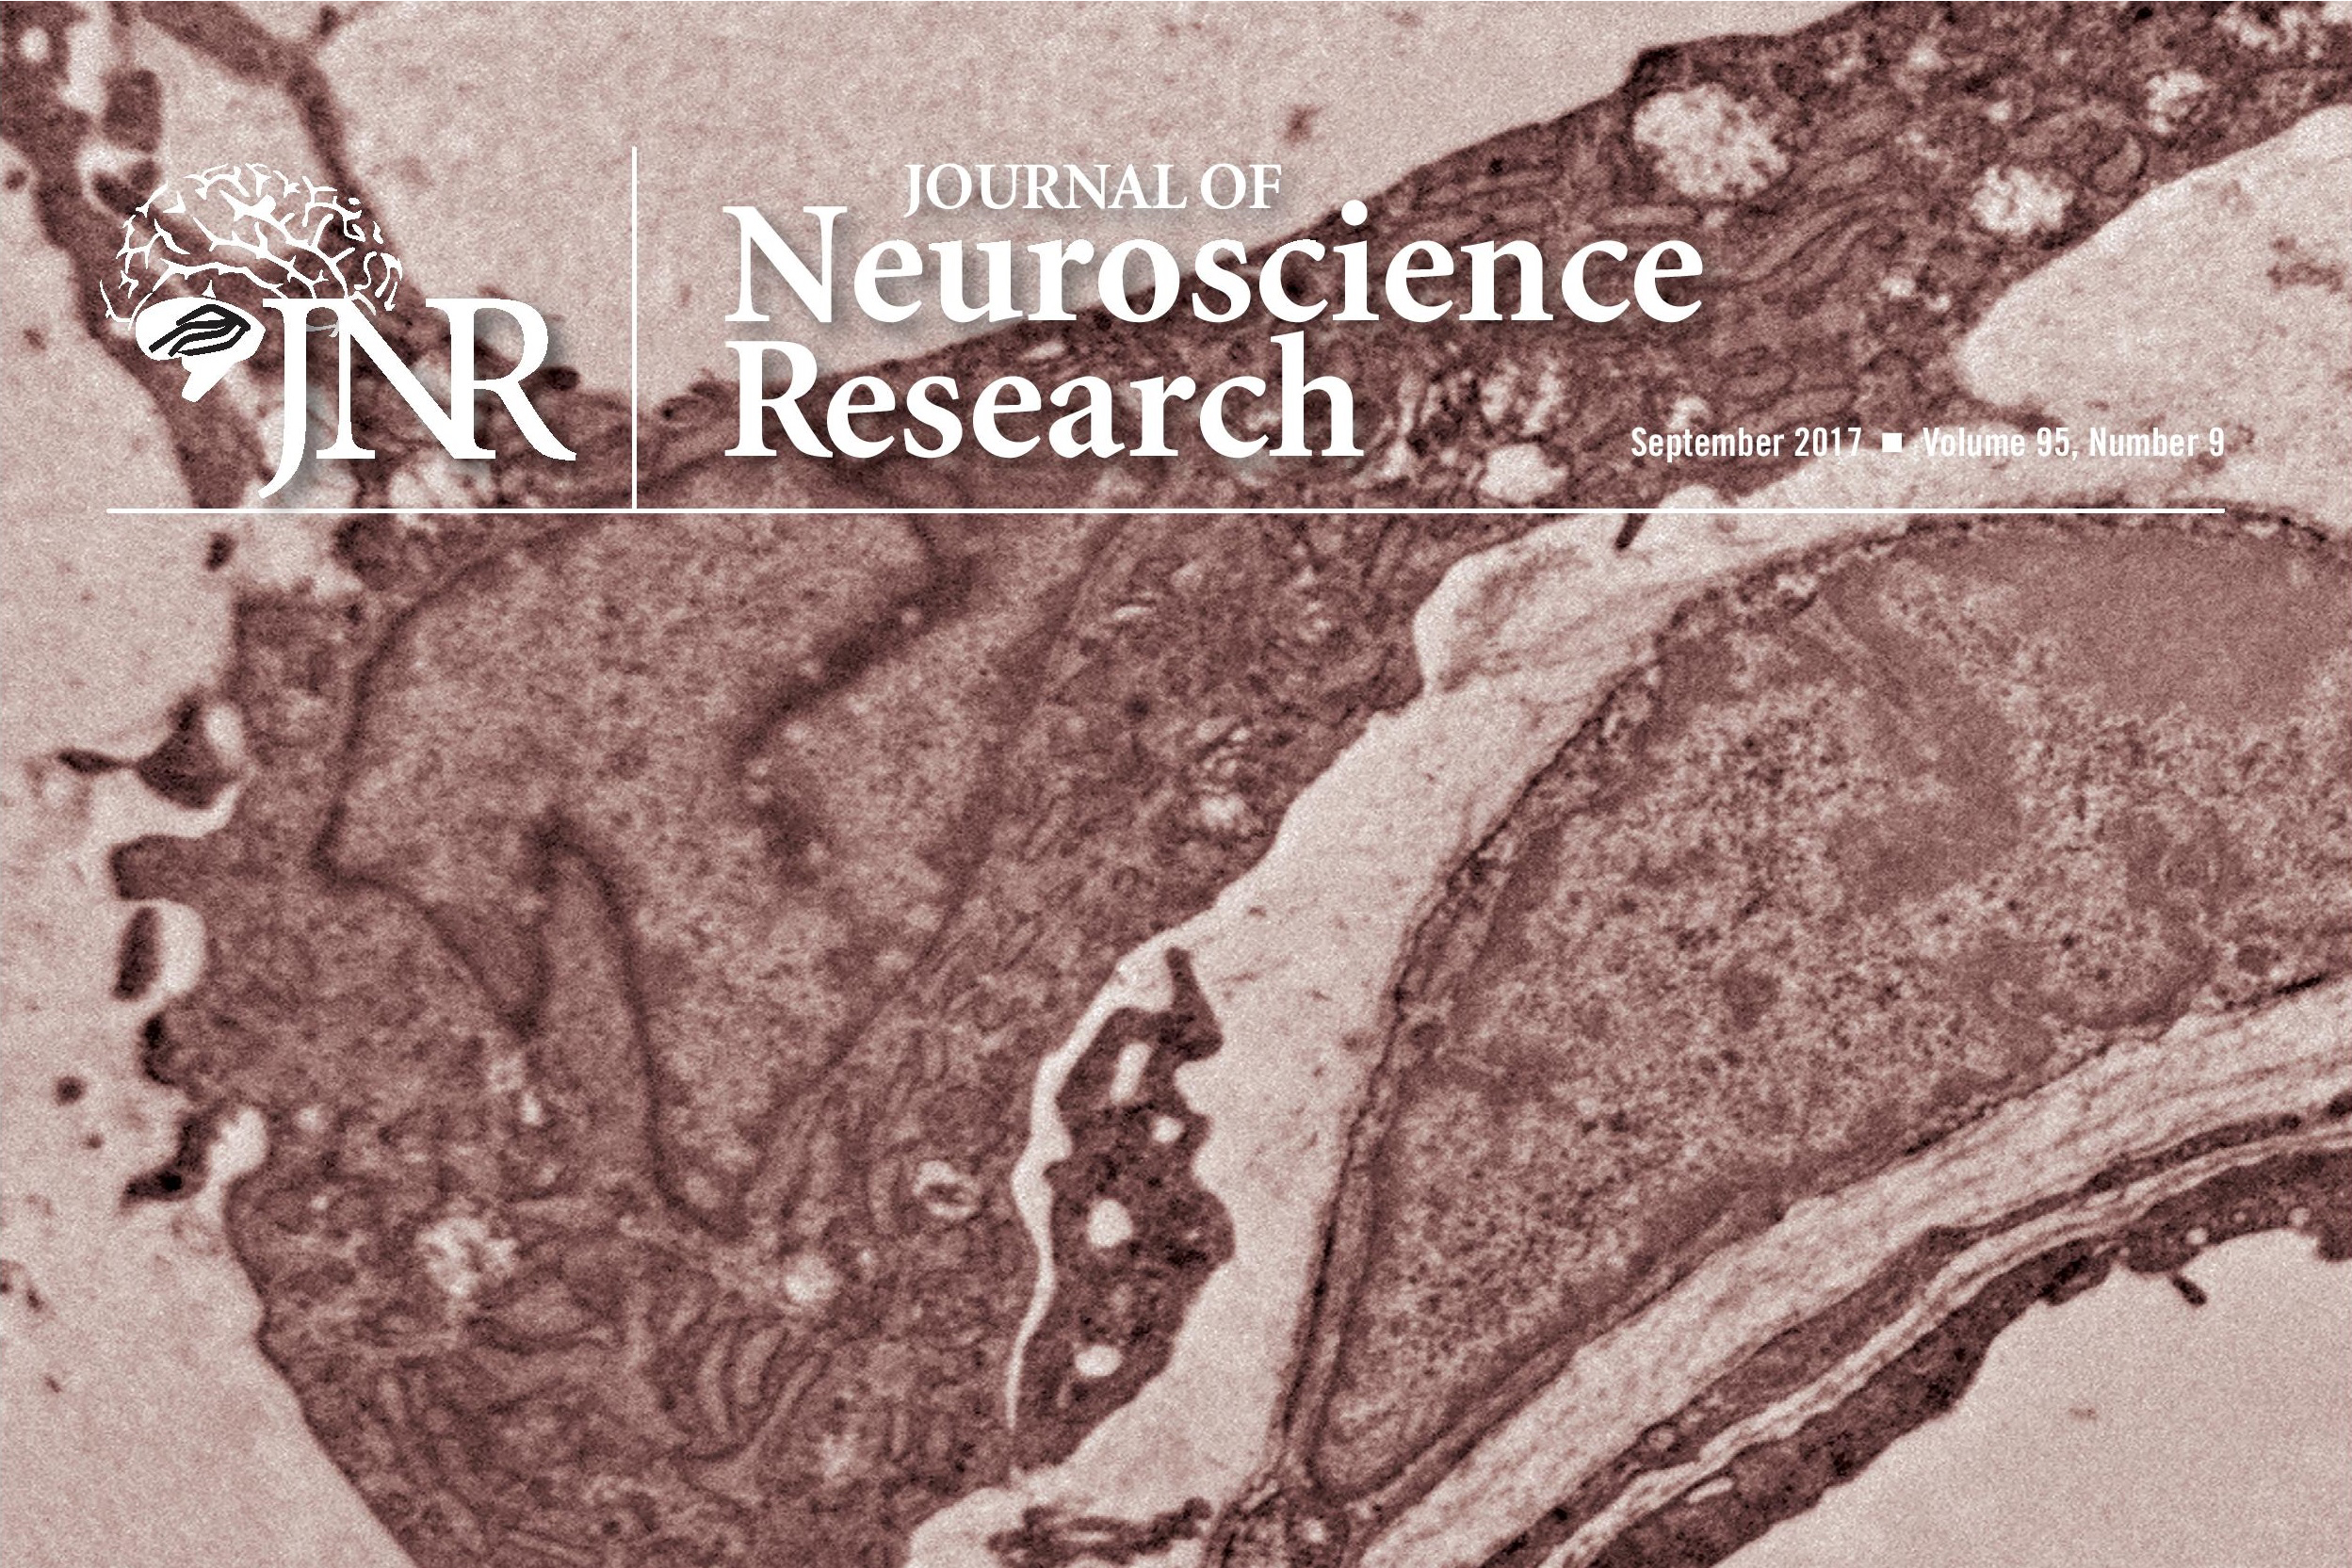 UConn Health's study will be Journal of Neuroscience Research cover story.